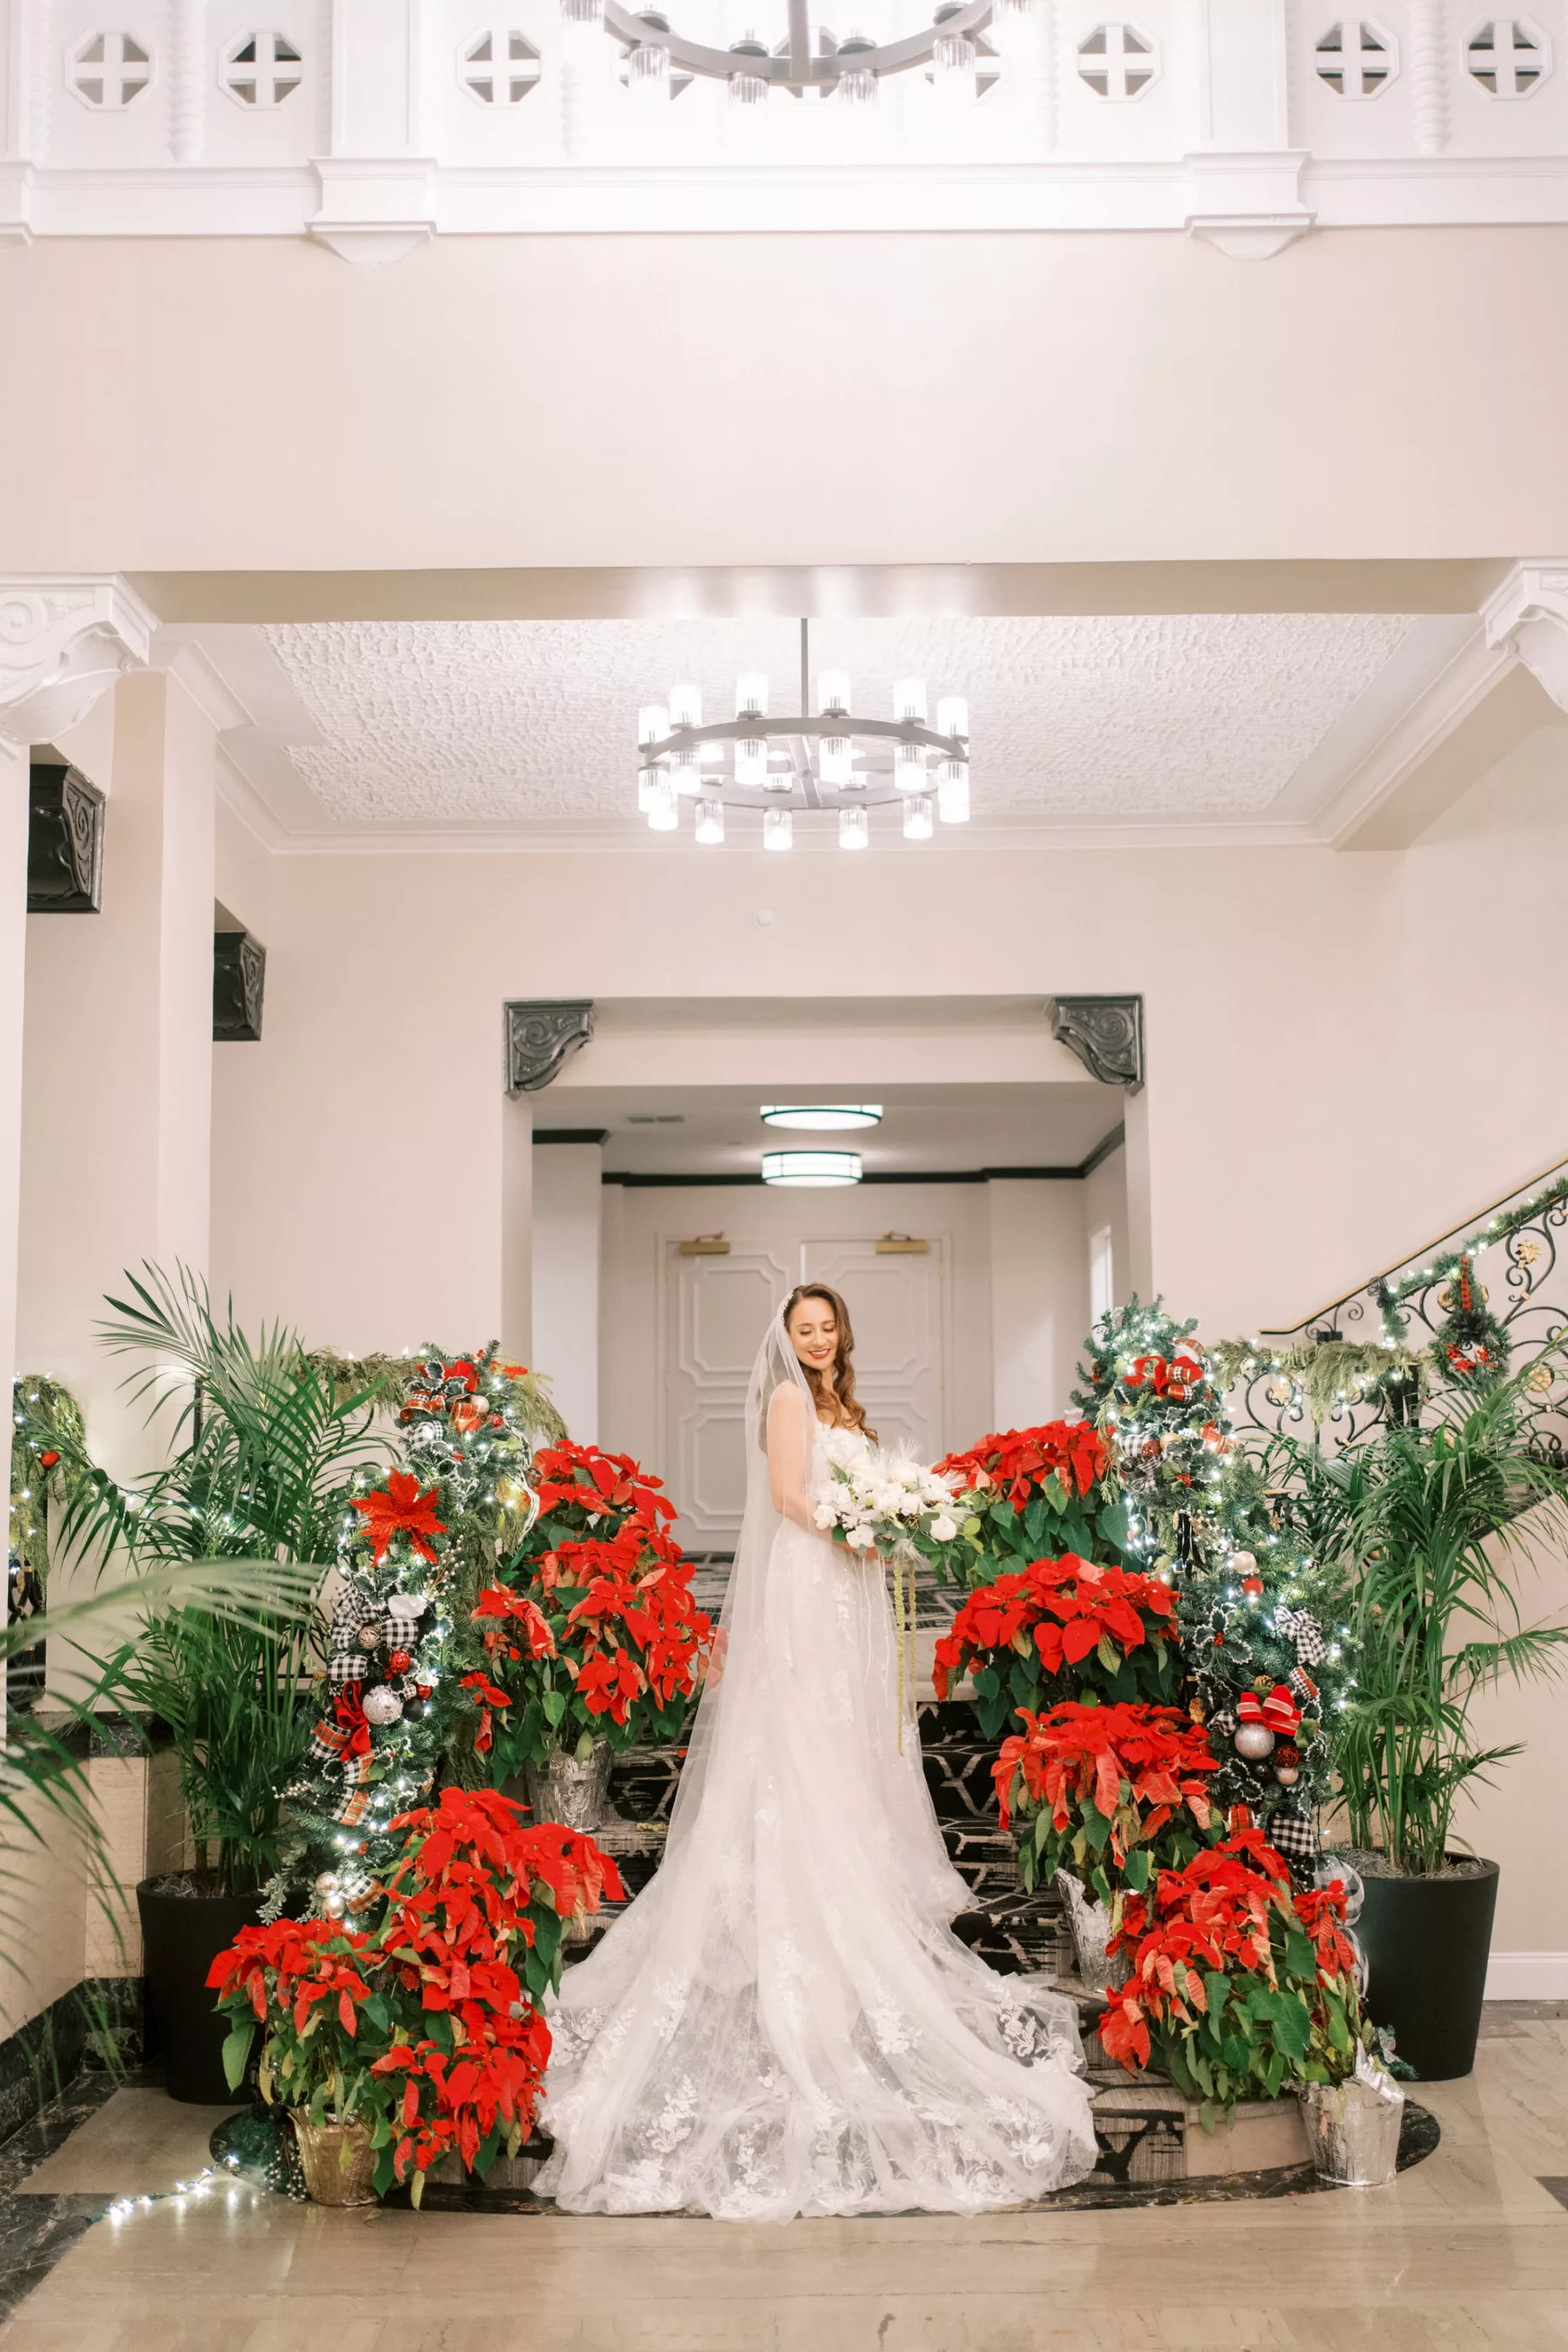 Christmas Inspired Great Gatsby Wedding Day Stair Decor Ideas | Tampa Bay Event Venue Hotel Flor | Photographer Eddy Almaguer Photography